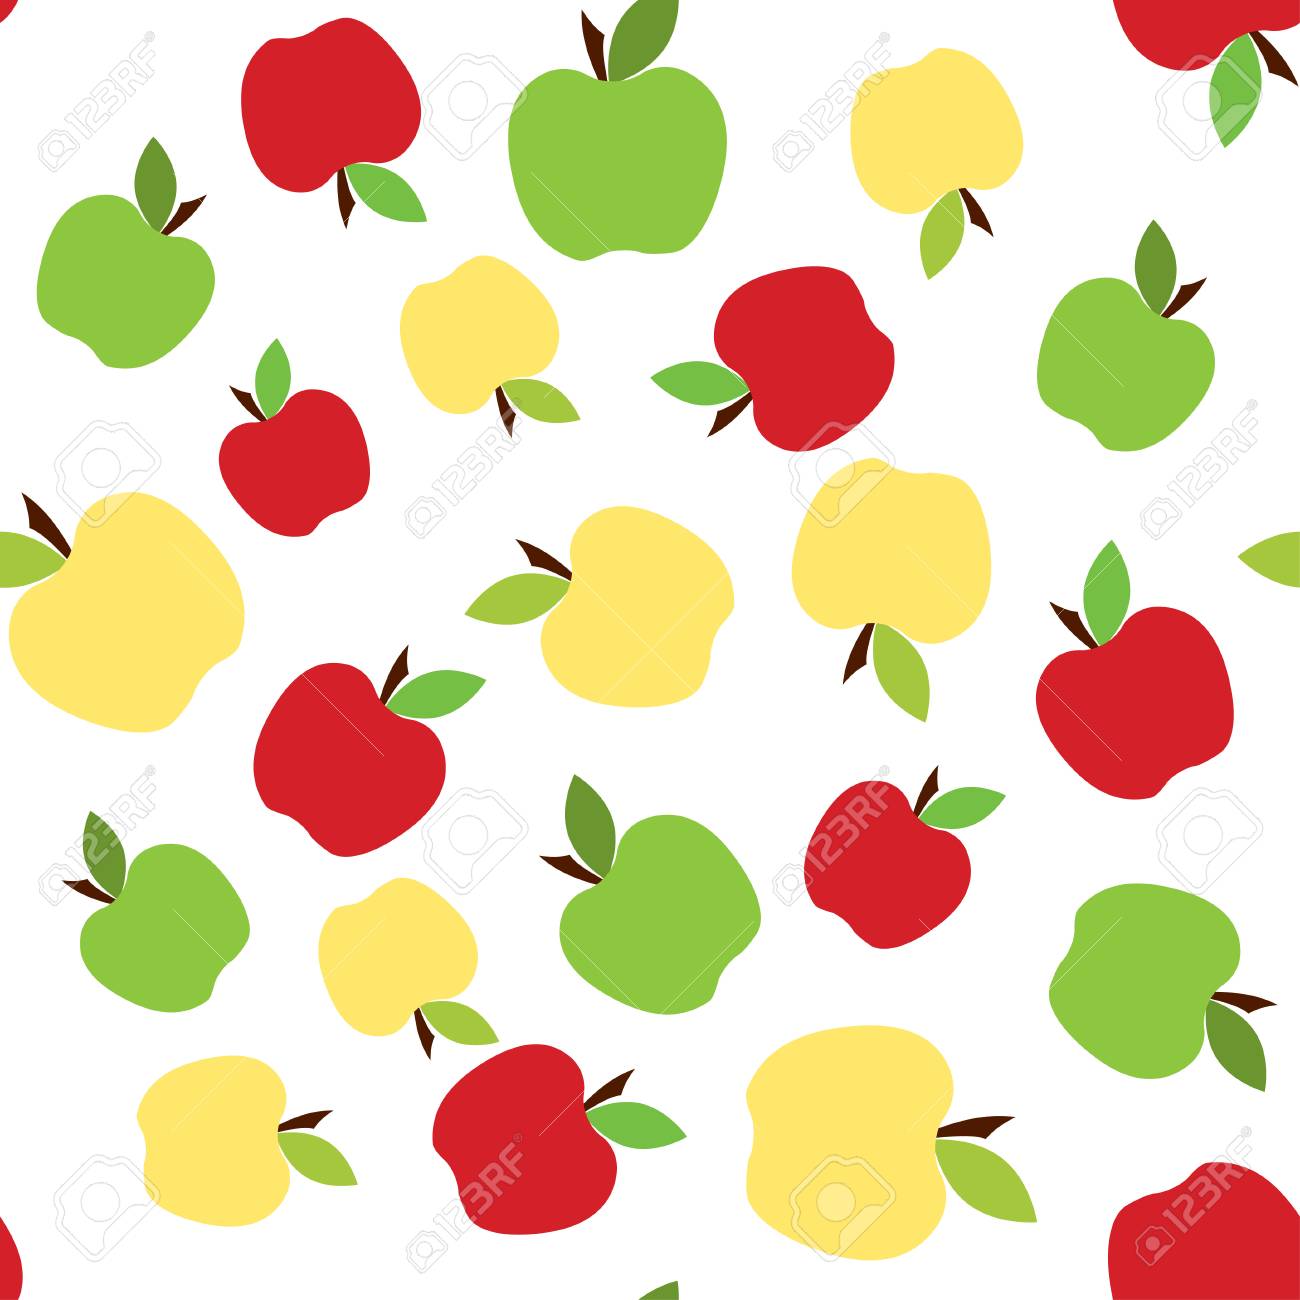 Green And Red Apples Seamless Pattern Background With Cute Fruits